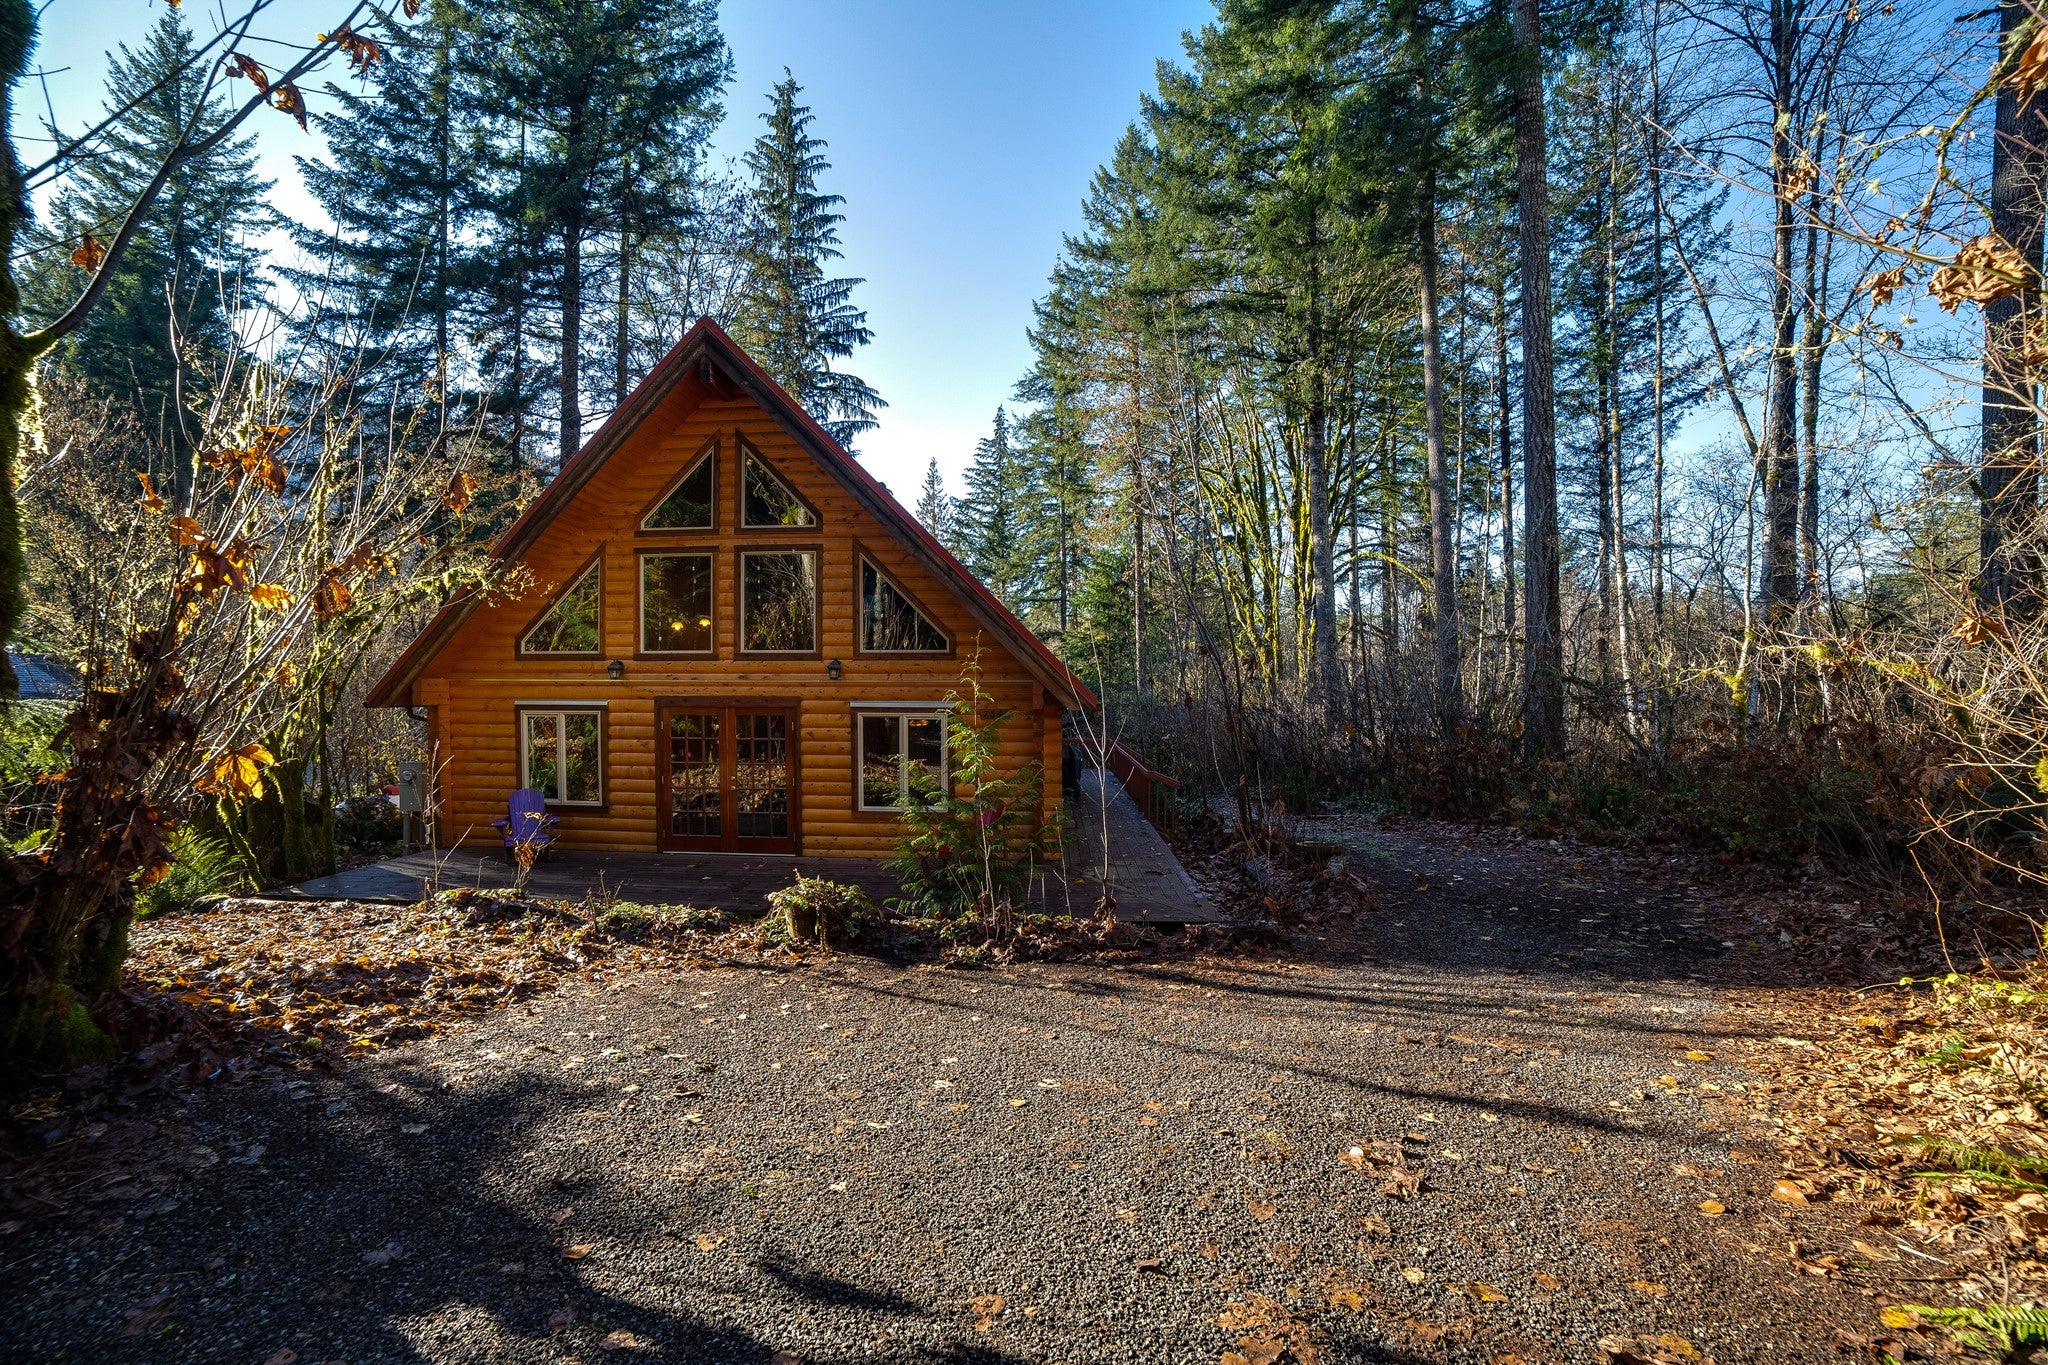 Camper submitted image from Mt. Baker Lodging - Cabin #21 - Wood Stove, W/D, PETS OK, SLEEPS-6 - 5